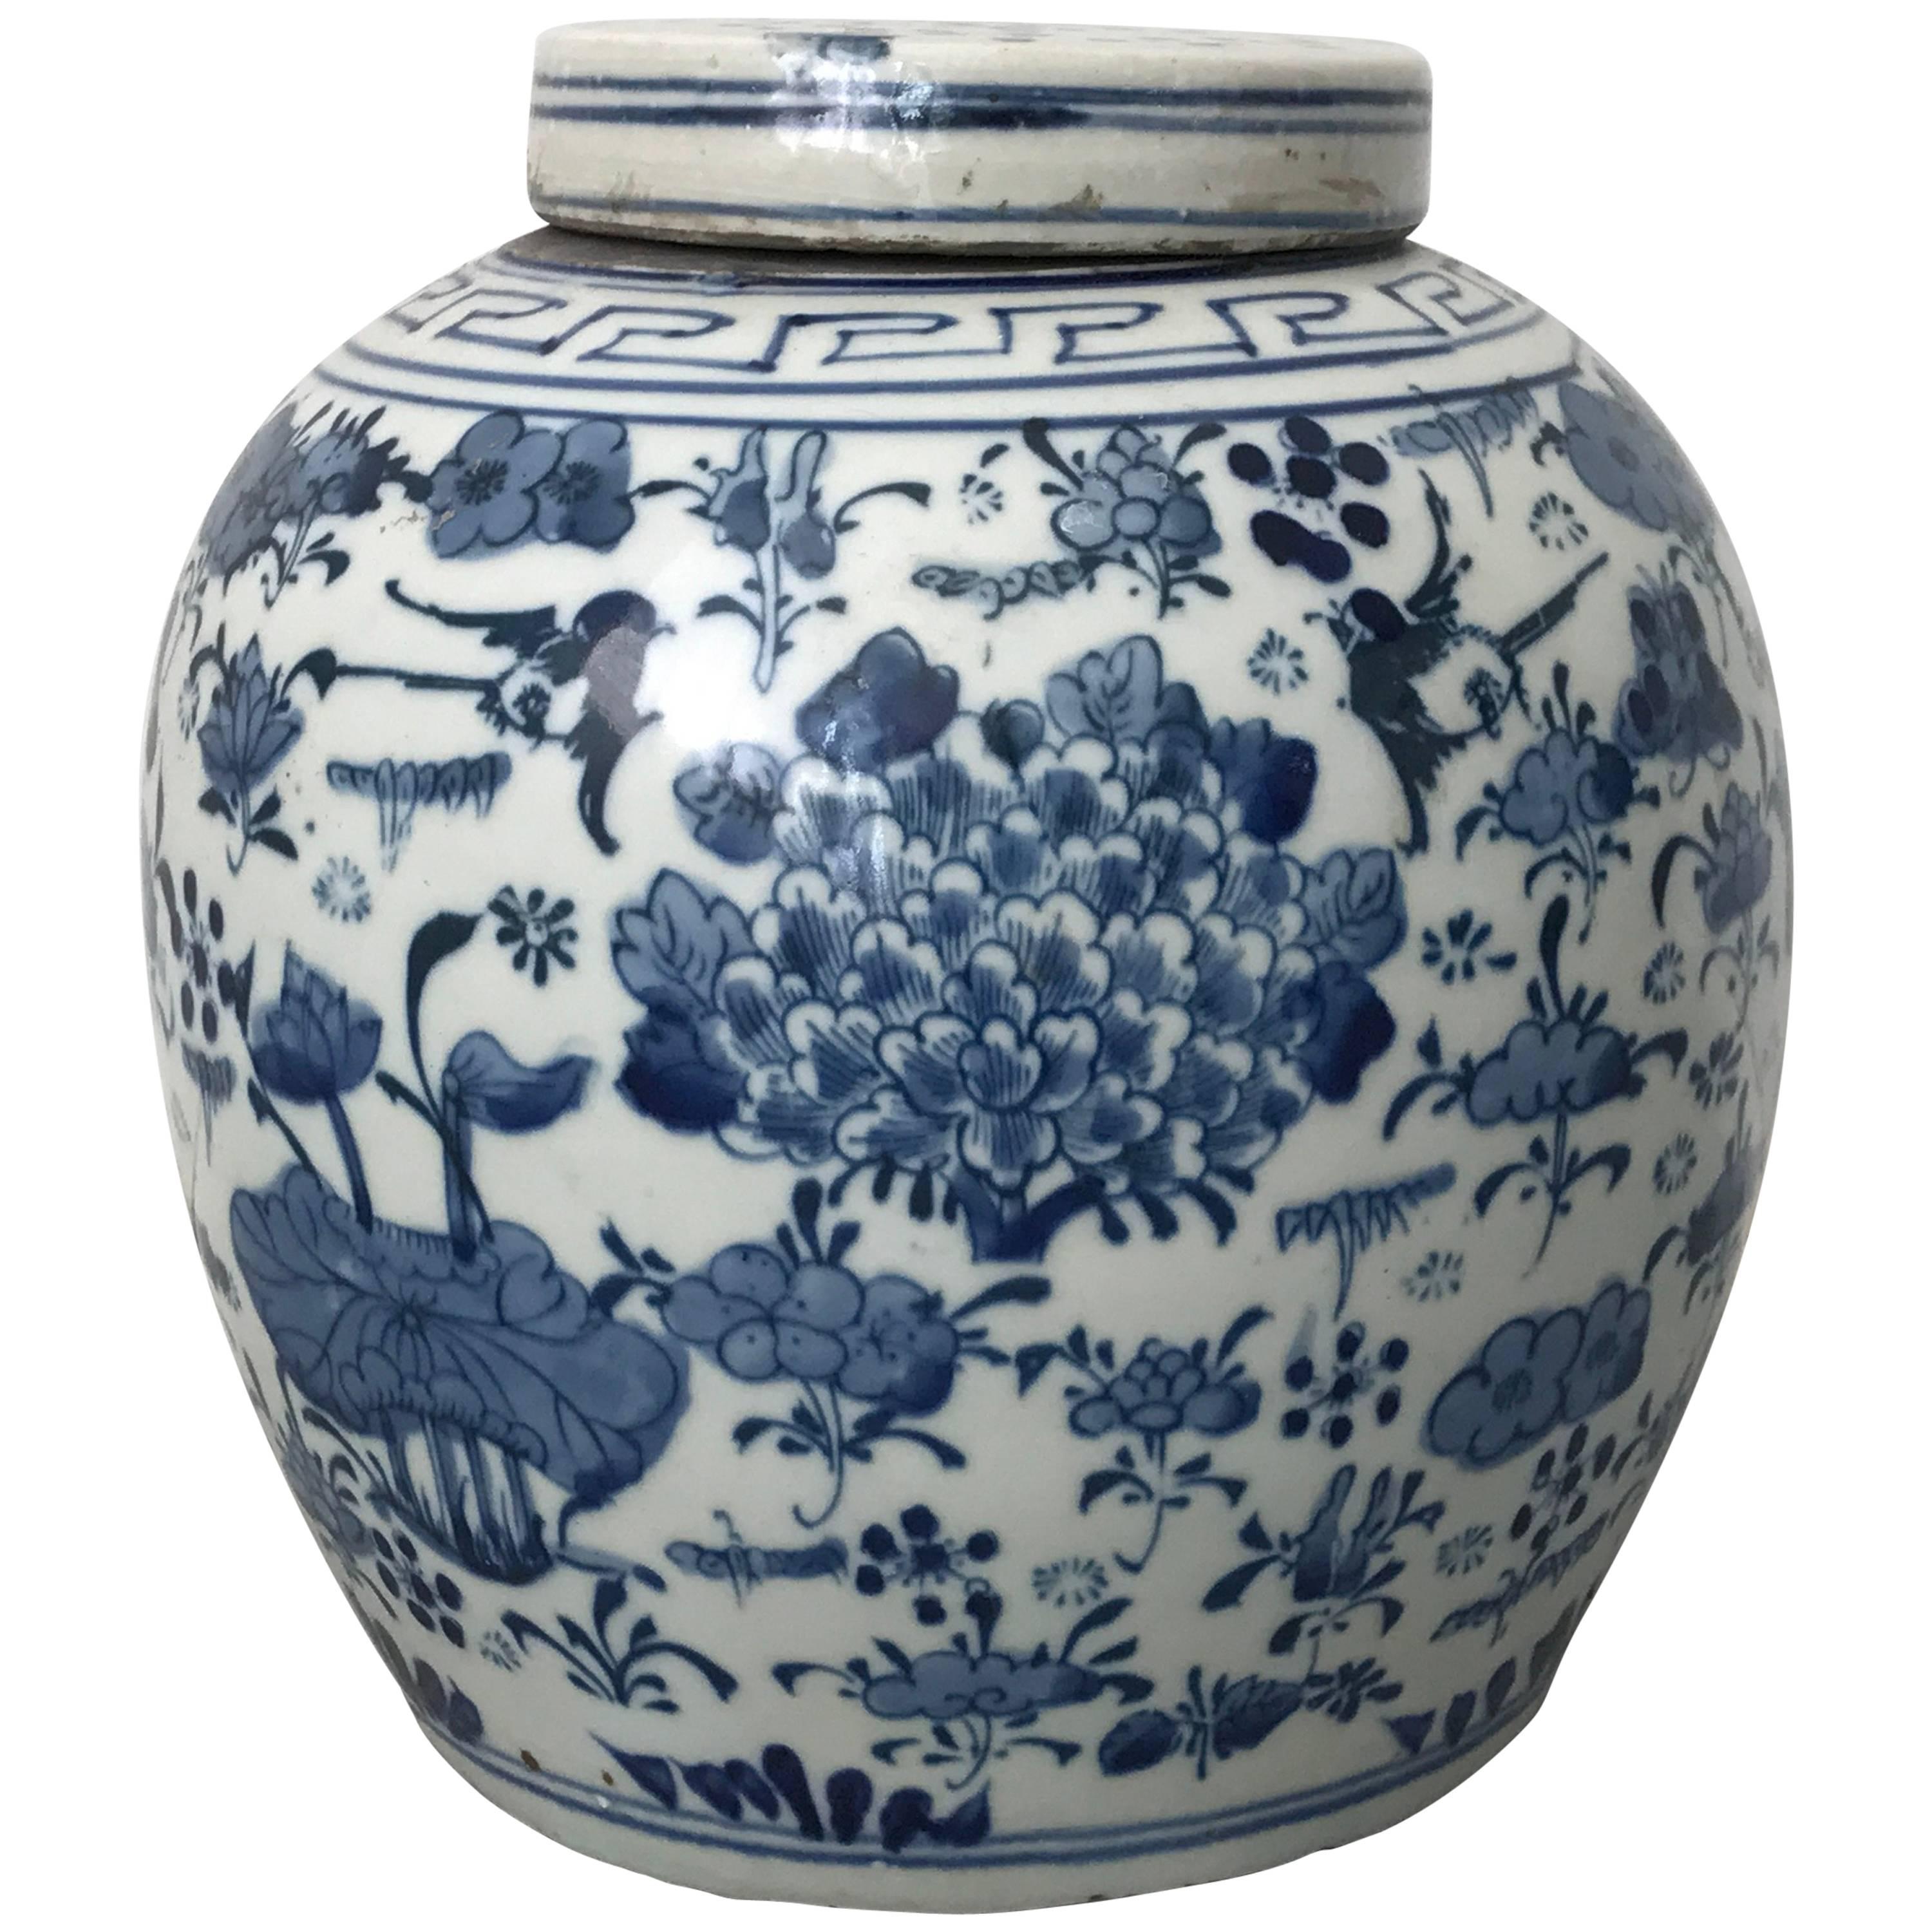 19th Century Asian Blue and White Ginger Jar with Cherry Blossom Tree Motif